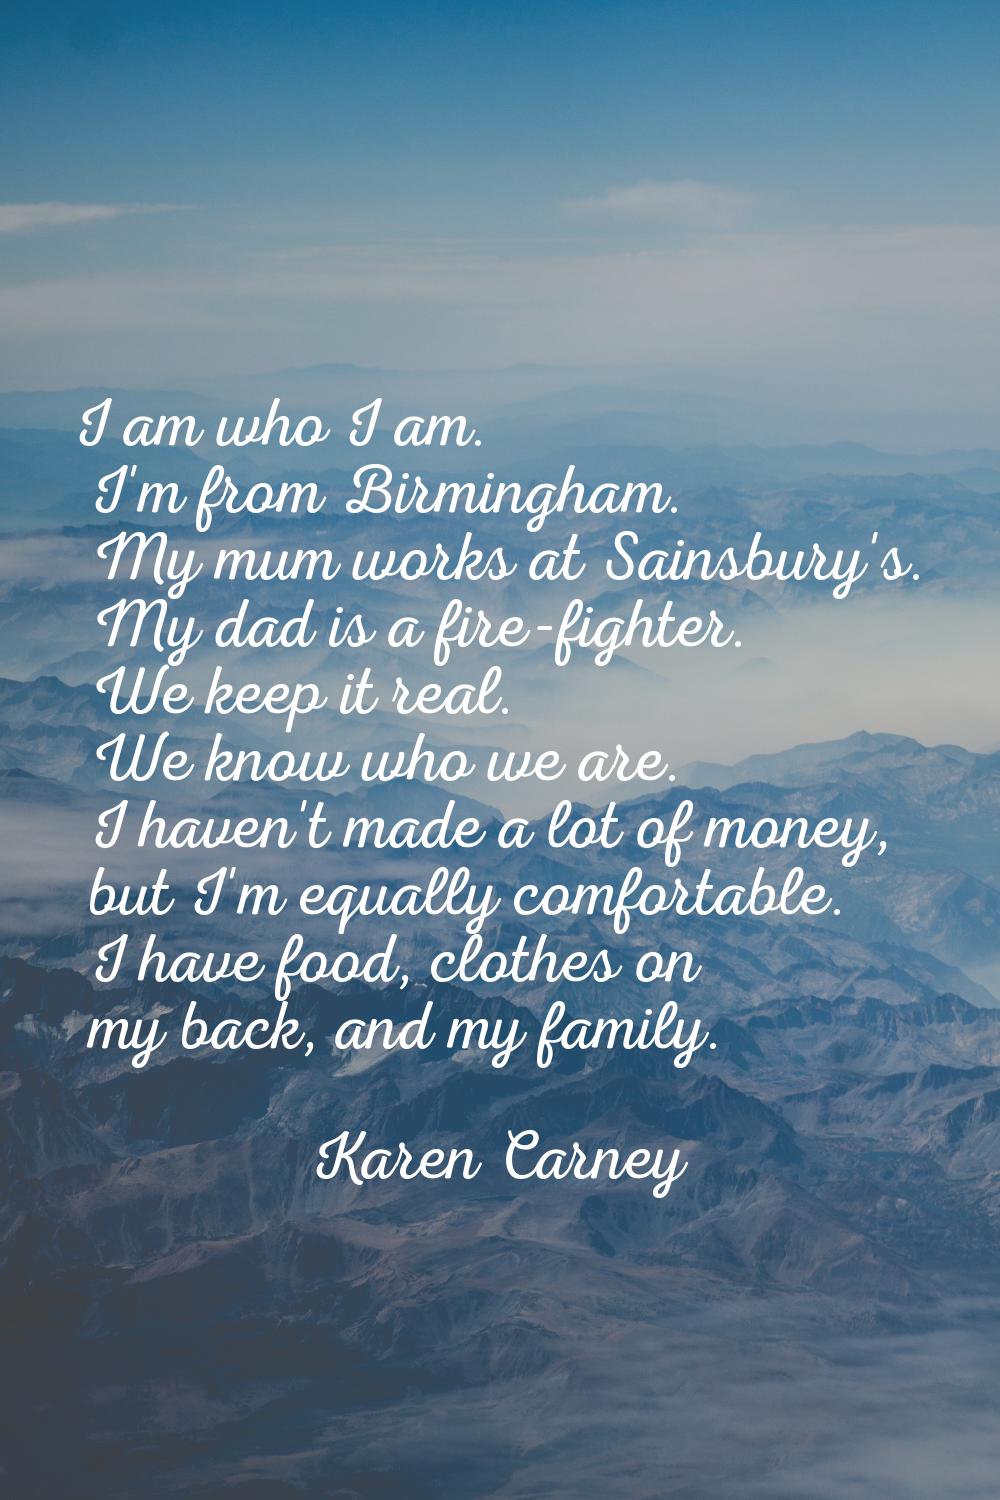 I am who I am. I'm from Birmingham. My mum works at Sainsbury's. My dad is a fire-fighter. We keep 